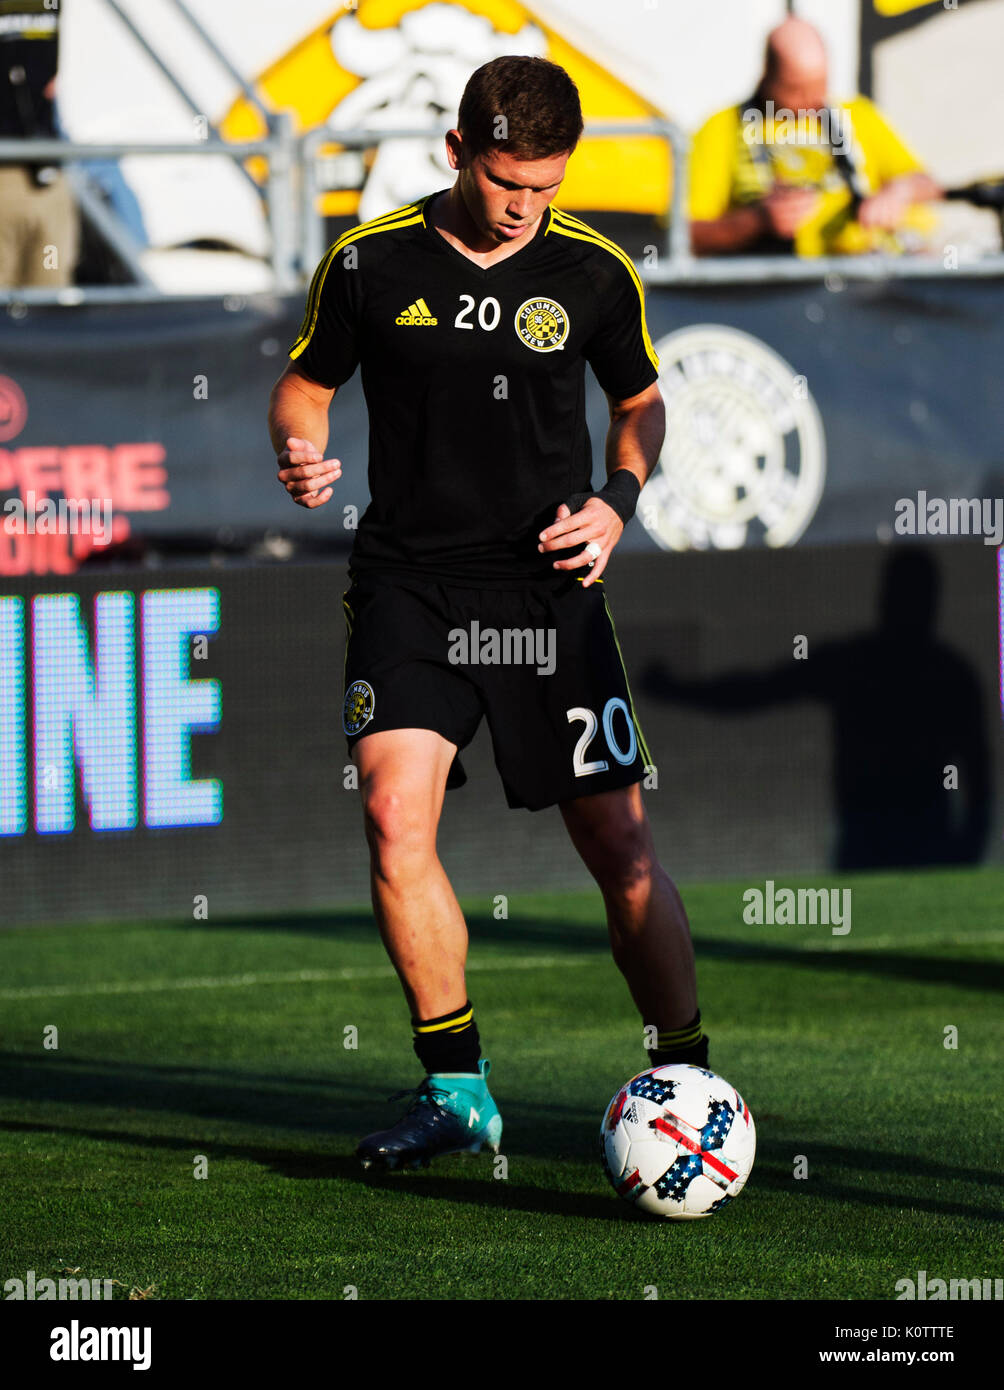 Columbus, USA. 22nd Aug, 2017. Columbus Crew SC midfielder Wil Trapp (20) warms up before facing the LA Galaxy in their match at Mapfre Stadium. Columbus, Ohio, USA. Credit: Brent Clark/Alamy Live News Stock Photo